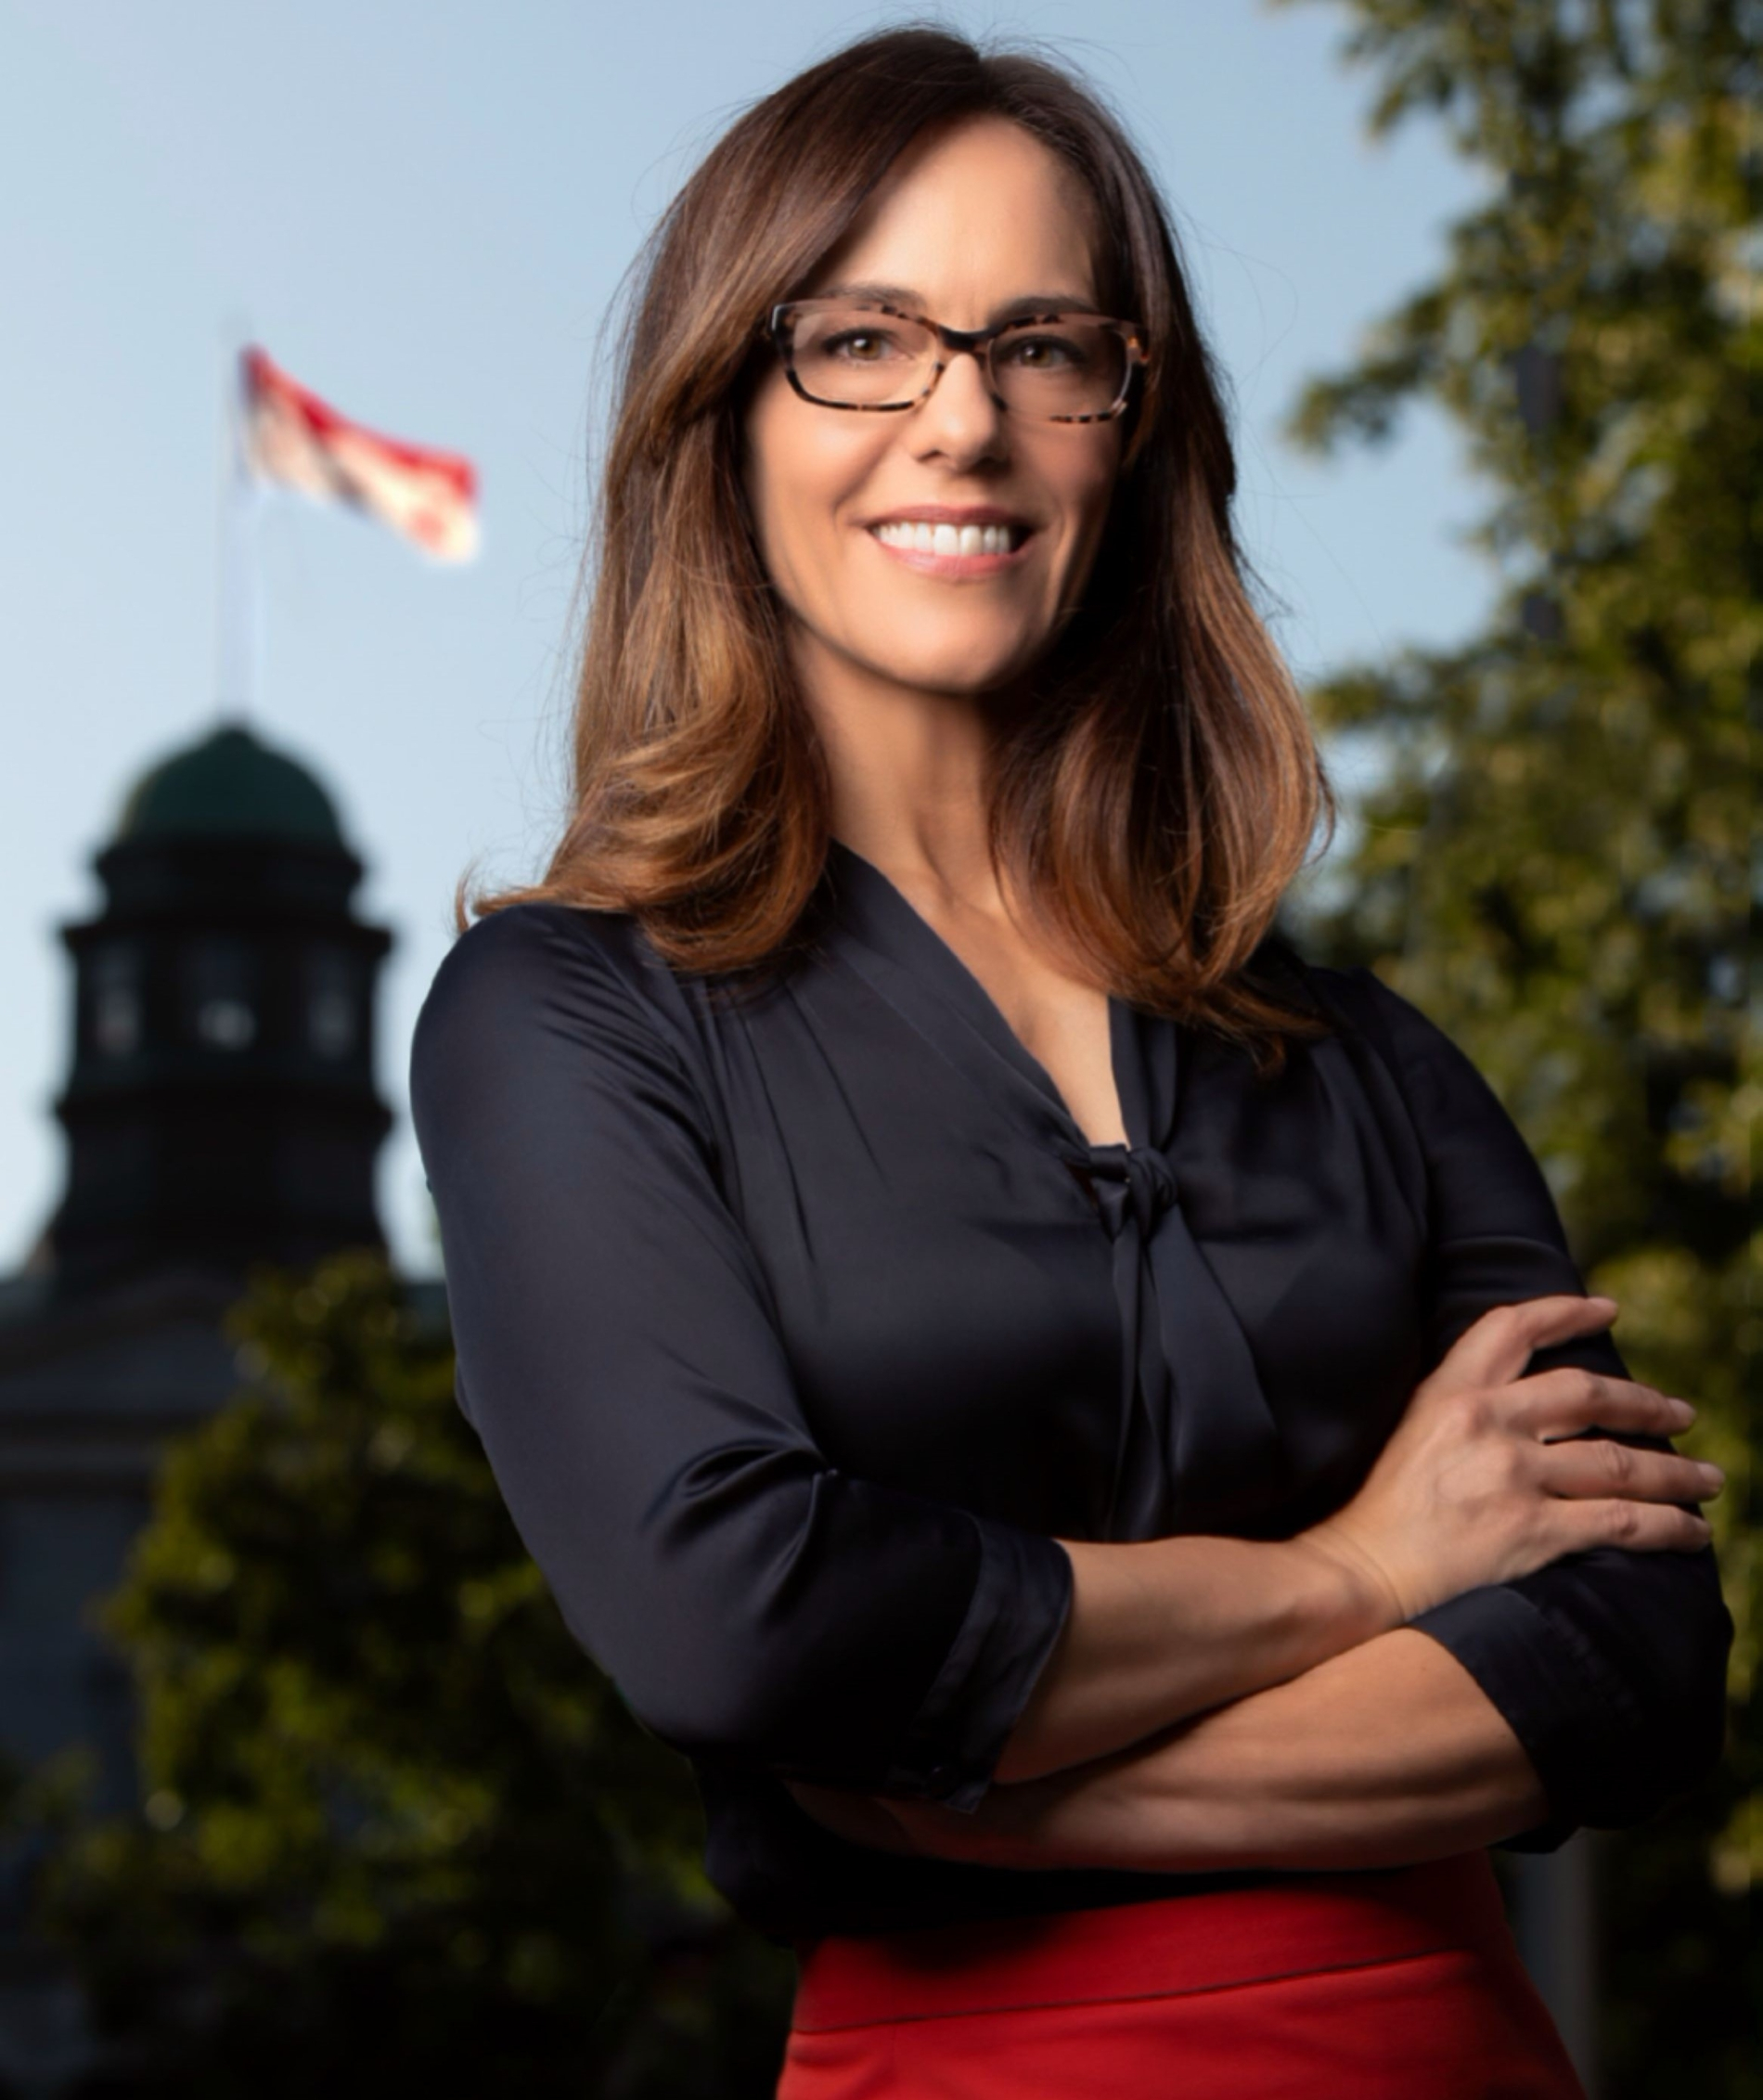 A woman stands with crossed arms in front of the McGill University campus Arts Building, She is wearing glasses and is smiling. The sky is blue. 